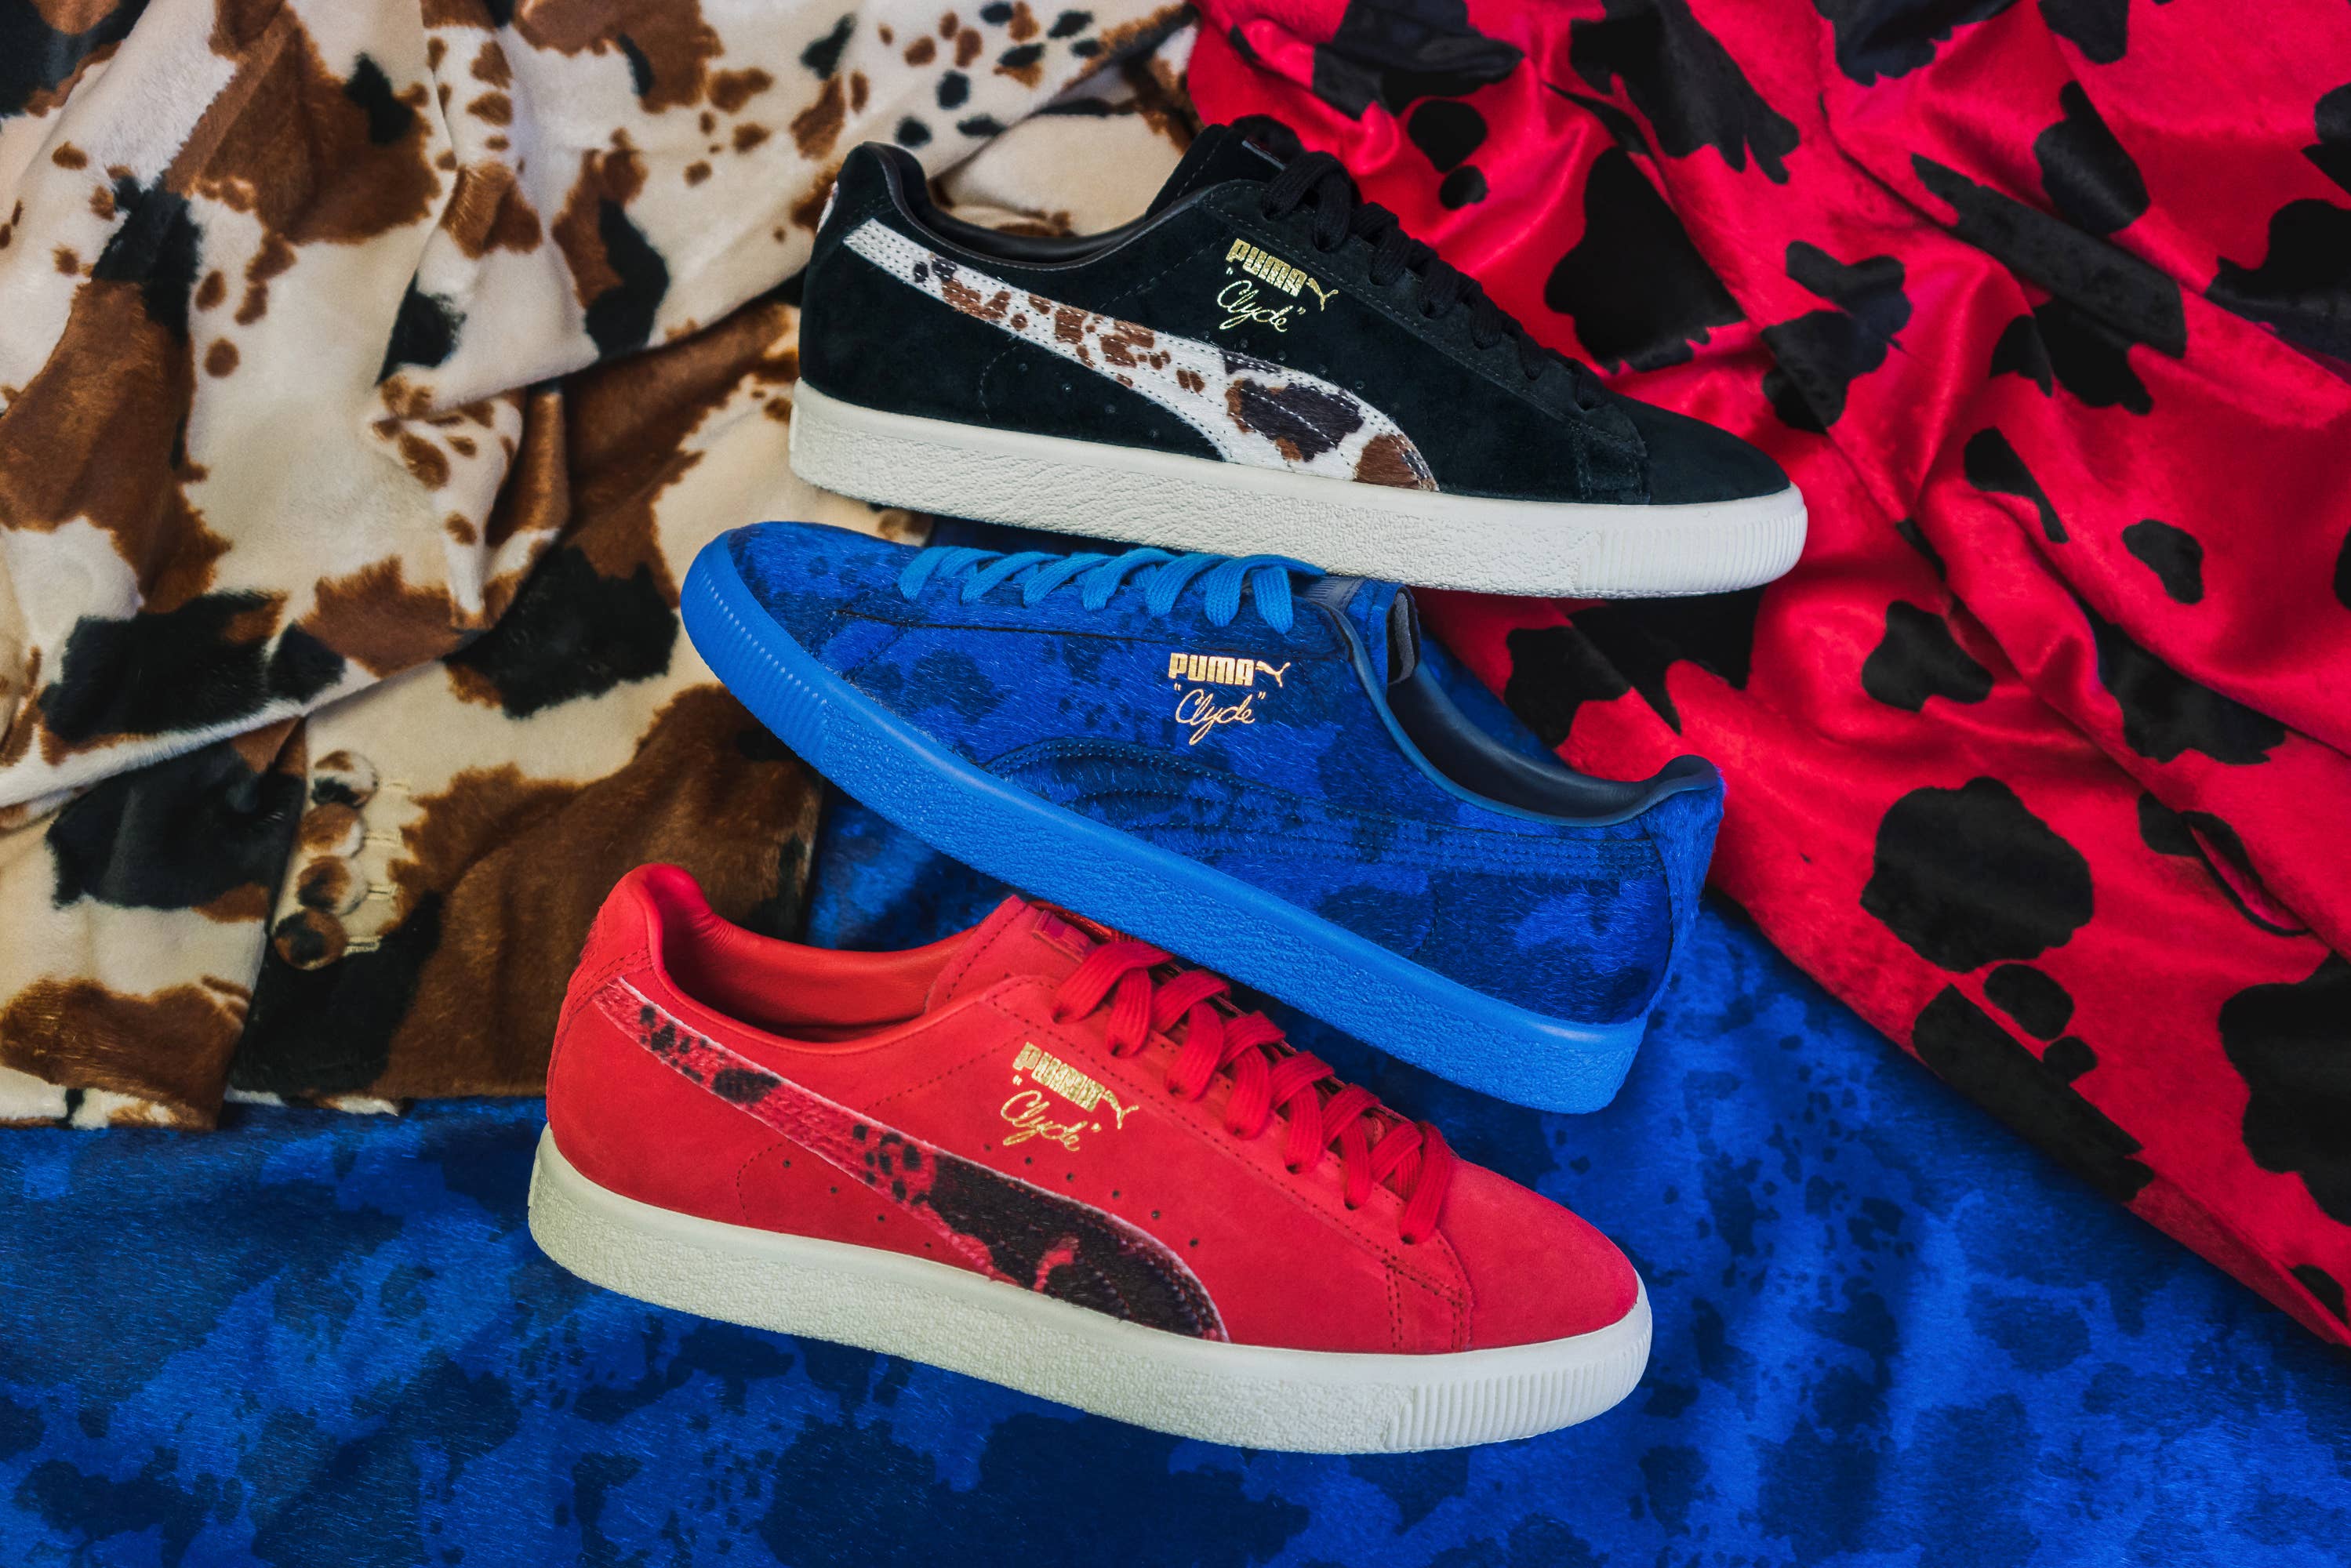 Packer Shoes x Puma Clyde "Cow Suit" Pack